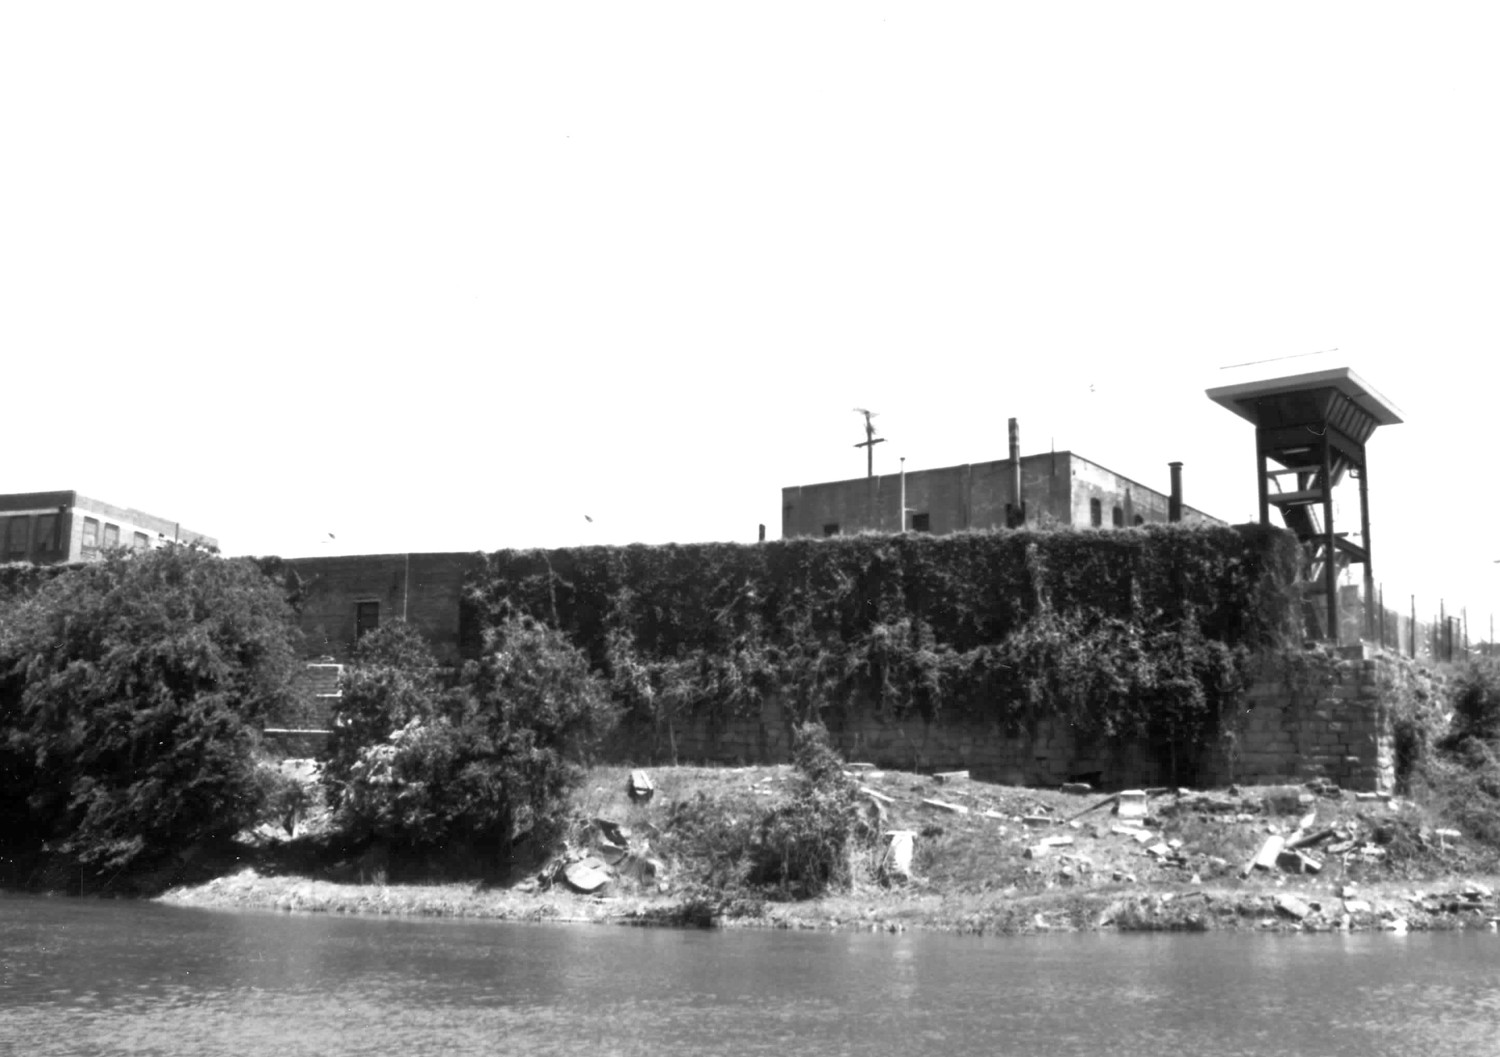 South Carolina Penitentiary - Central Correctional Institution, Columbia South Carolina Southwest corner of Boundary Wall viewed from canal (1994)